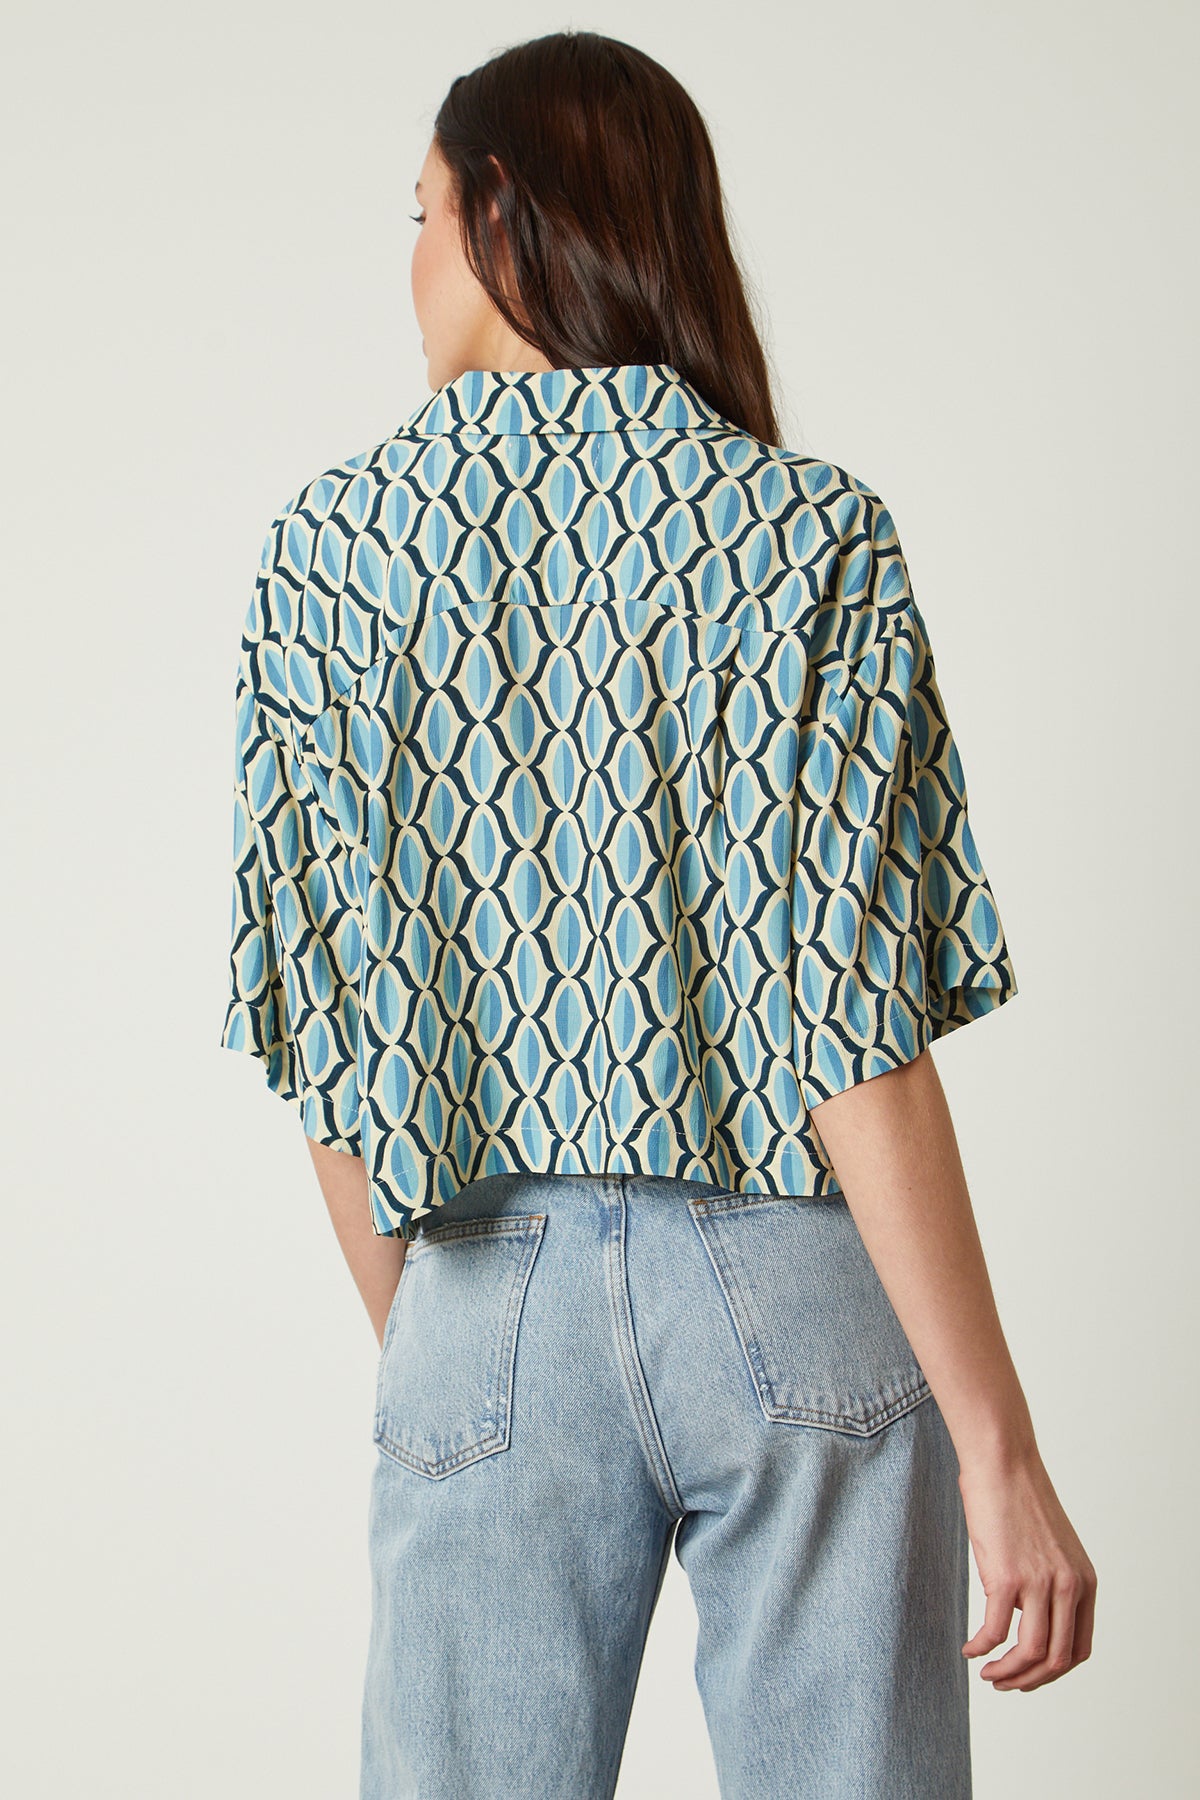 The back view of a woman wearing jeans and the Velvet by Graham & Spencer BECKETT PRINTED BUTTON-UP TOP with a geometric pattern and higher waist jean.-26078942527681